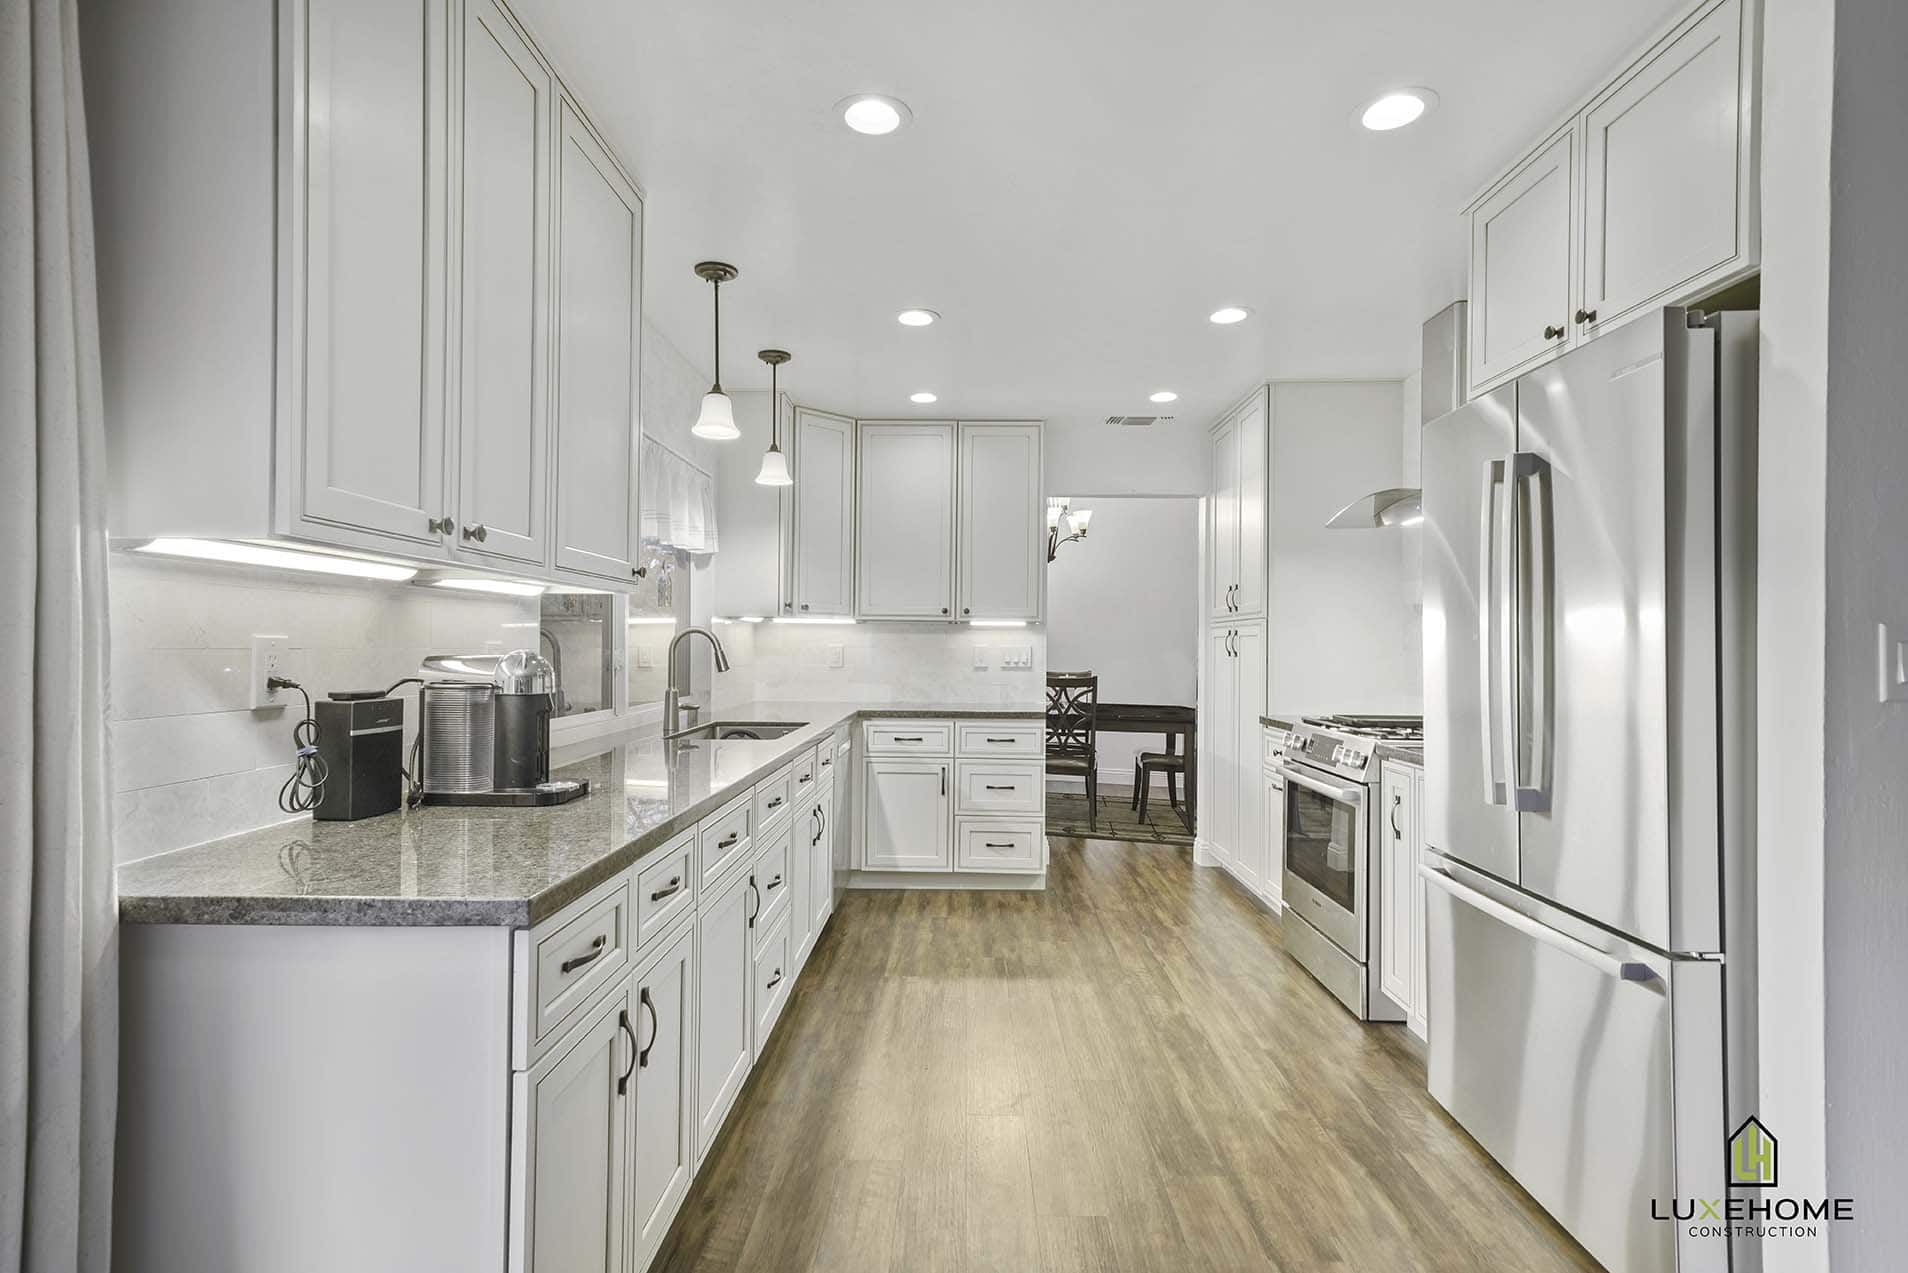 Orangevale, CA kitchen remodel with strategic lighting placement for a brighter all-white kitchen.